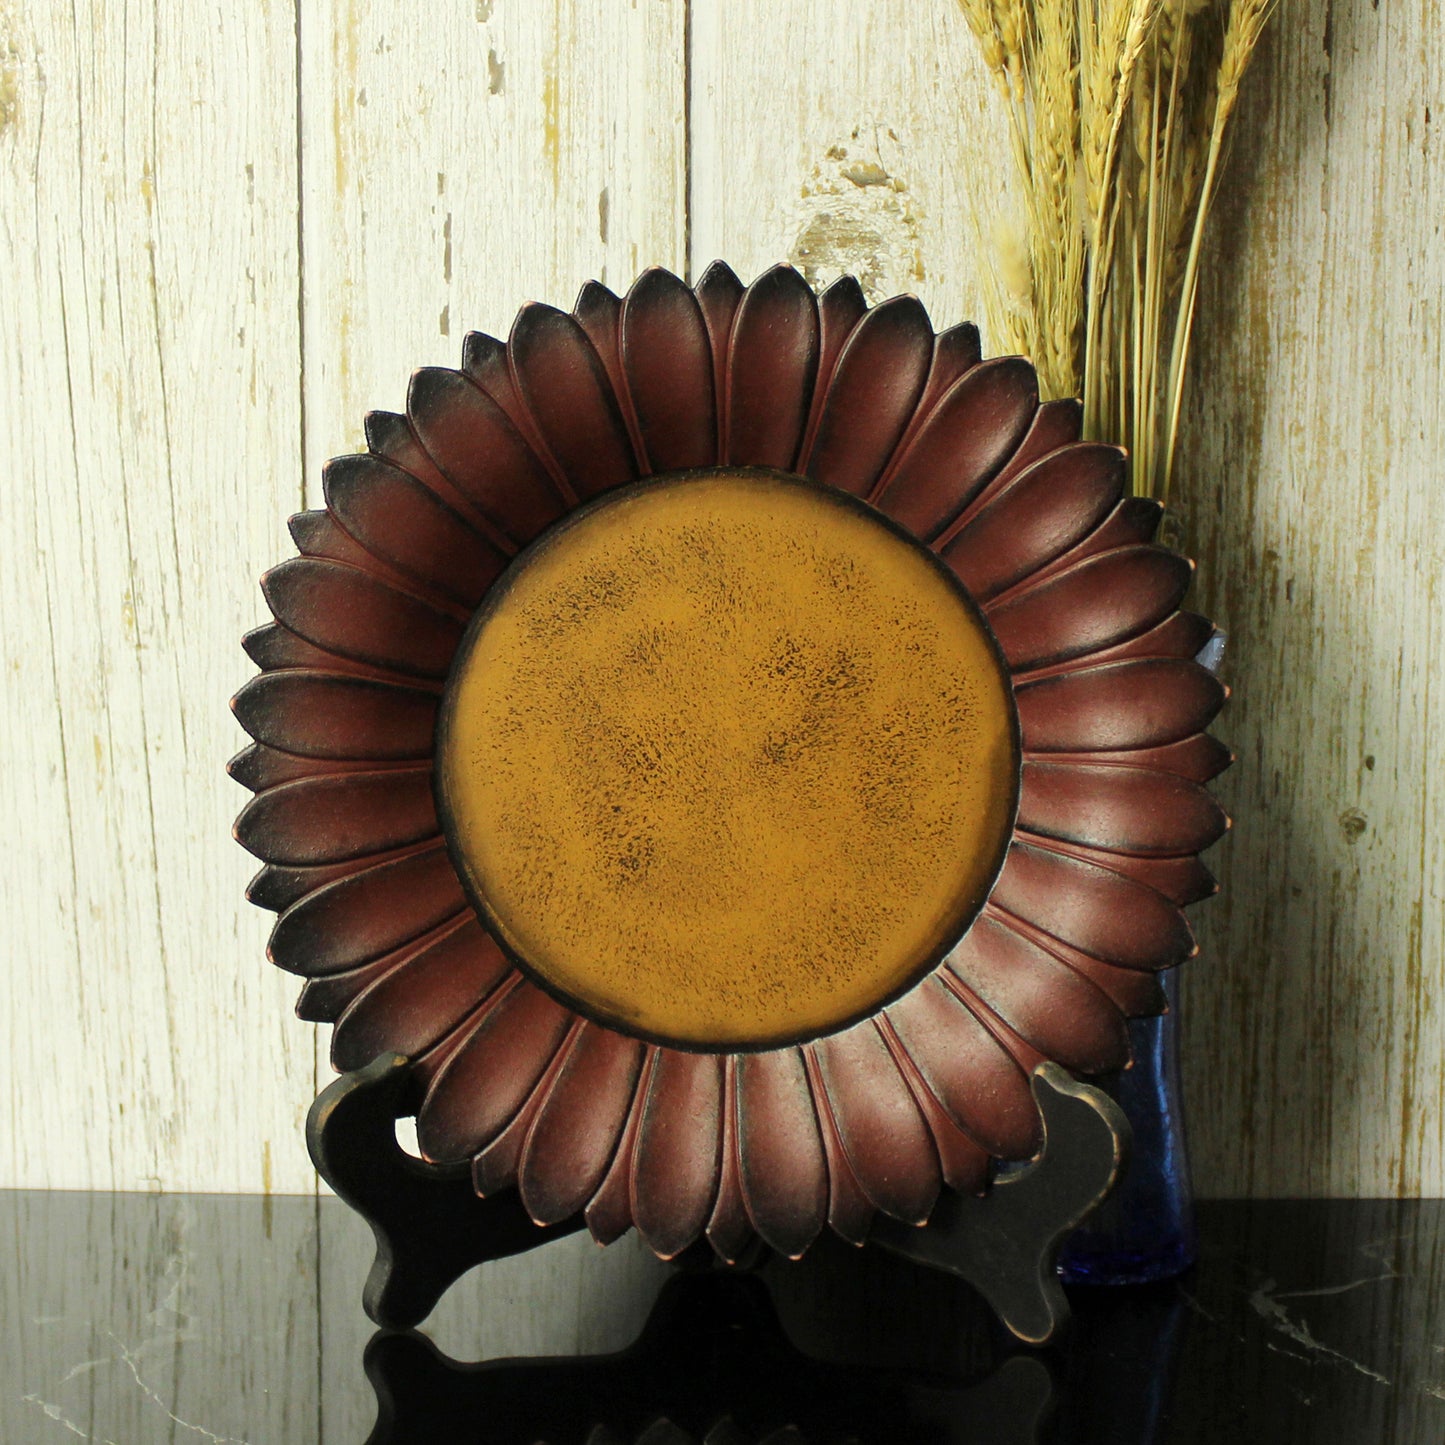 CVHOMEDECO. Sunflower Plate with Rack Country Vintage Display Wooden Plate Home and Office Décor Art, 11 Inch